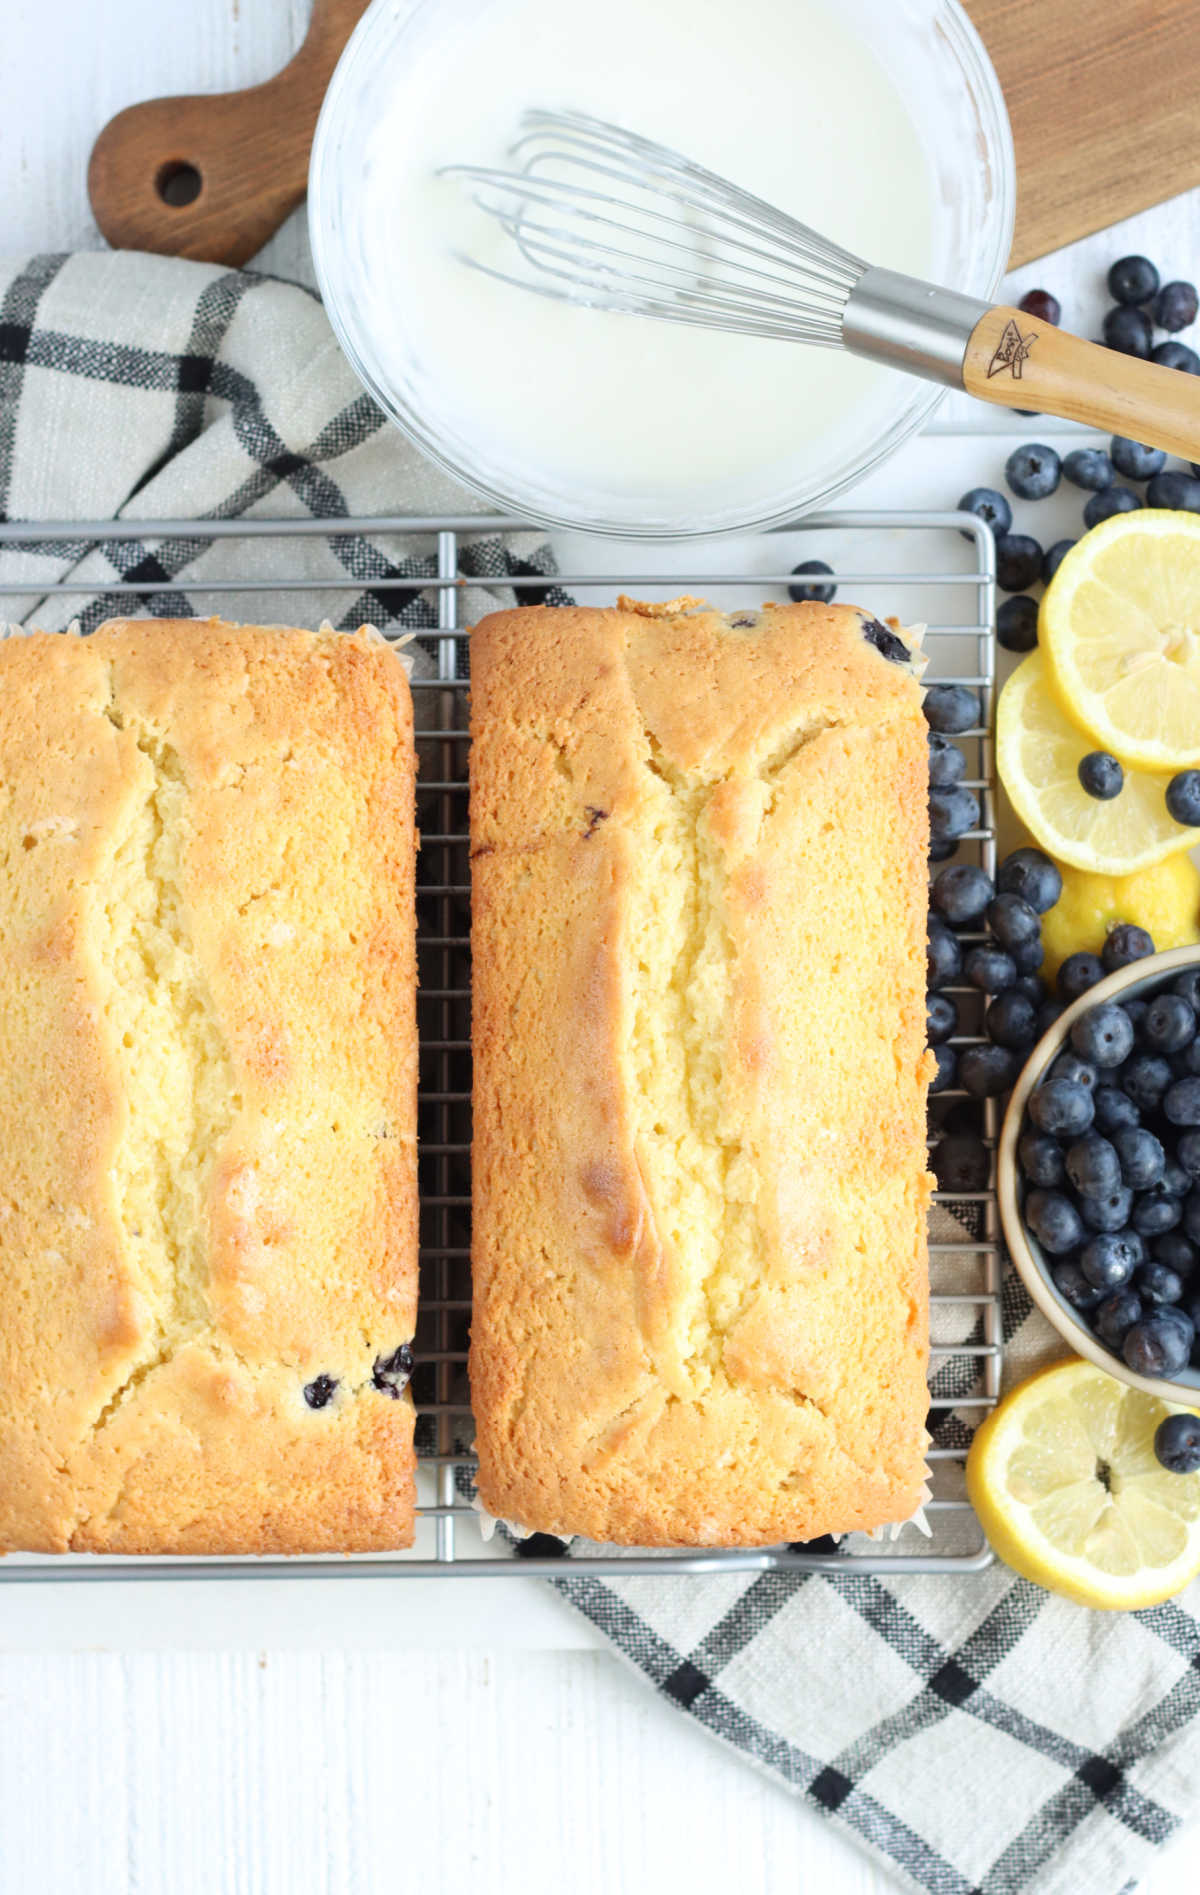 Two lemon blueberry breads on metal baking rack, bowl of blueberries and lemon slices to right.